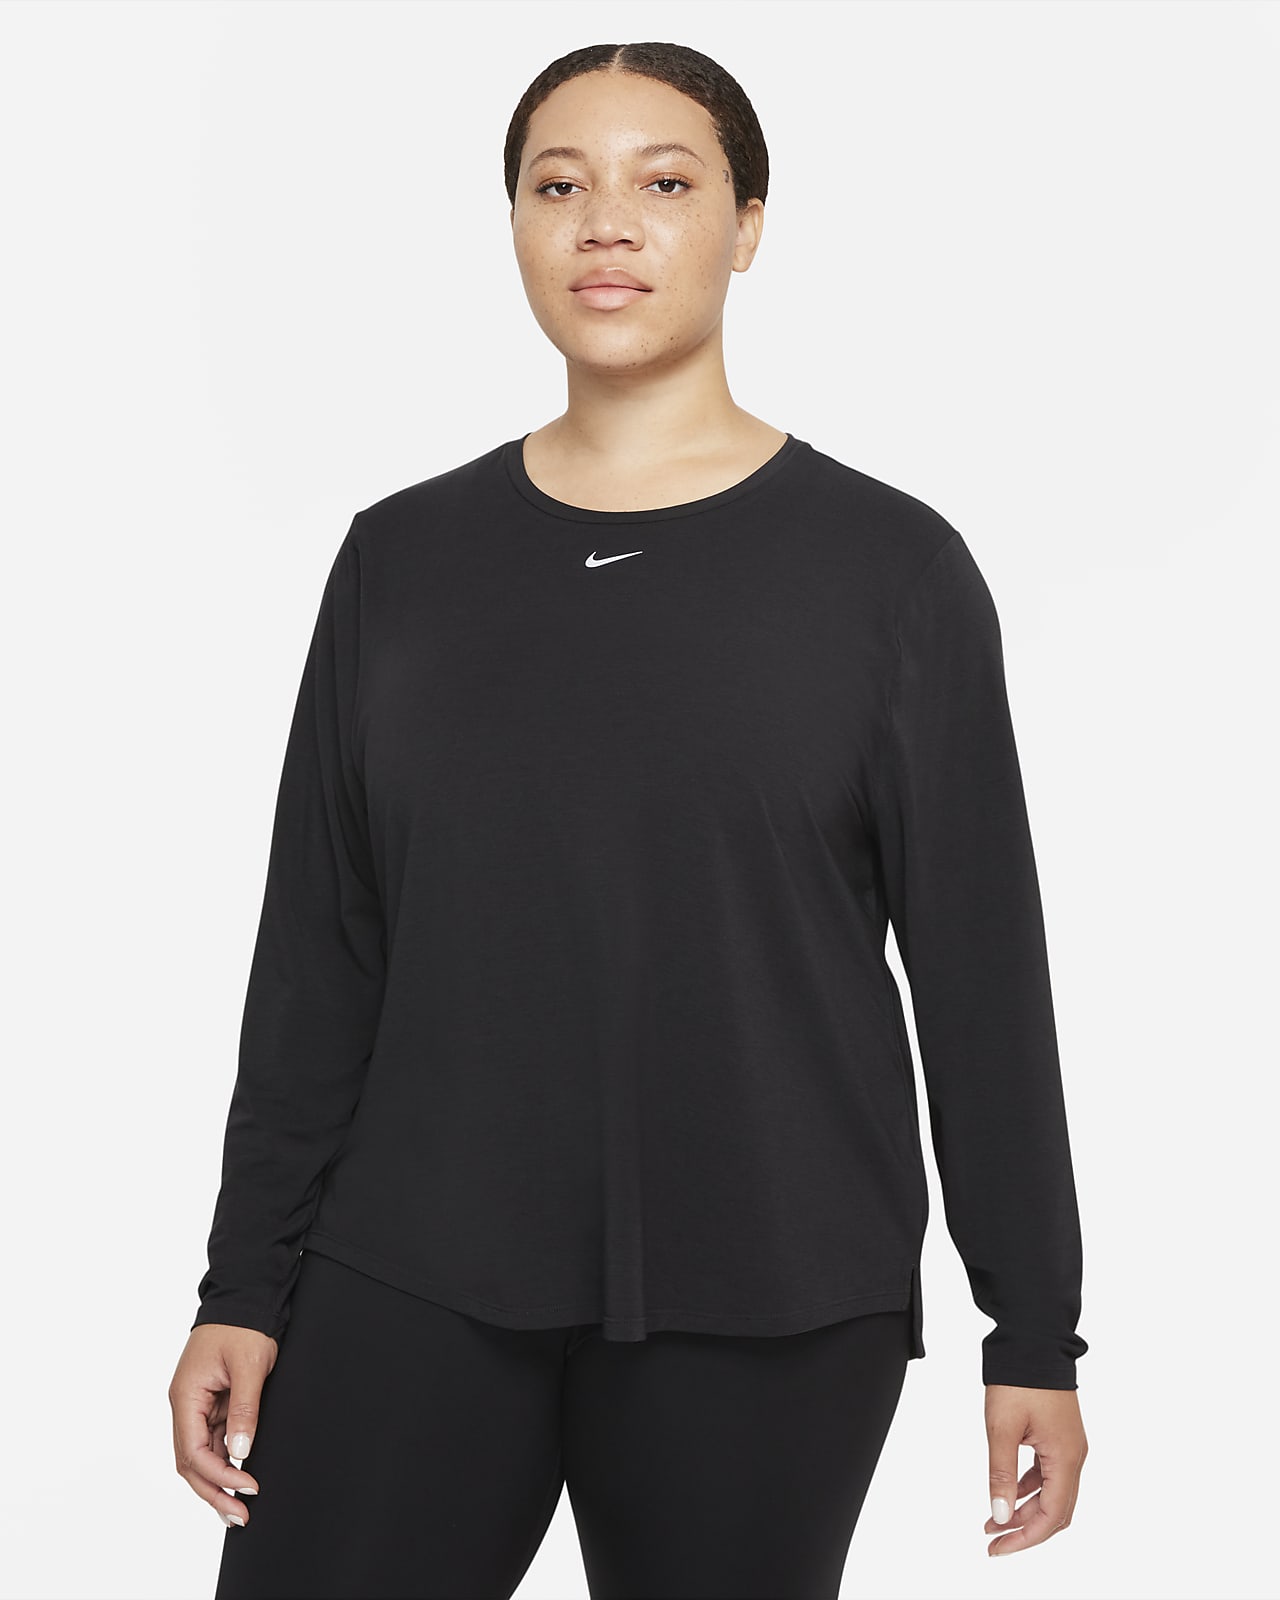 Nike Dri-FIT UV One Luxe Standard Fit Long-Sleeve Top (Plus Size). Nike.com